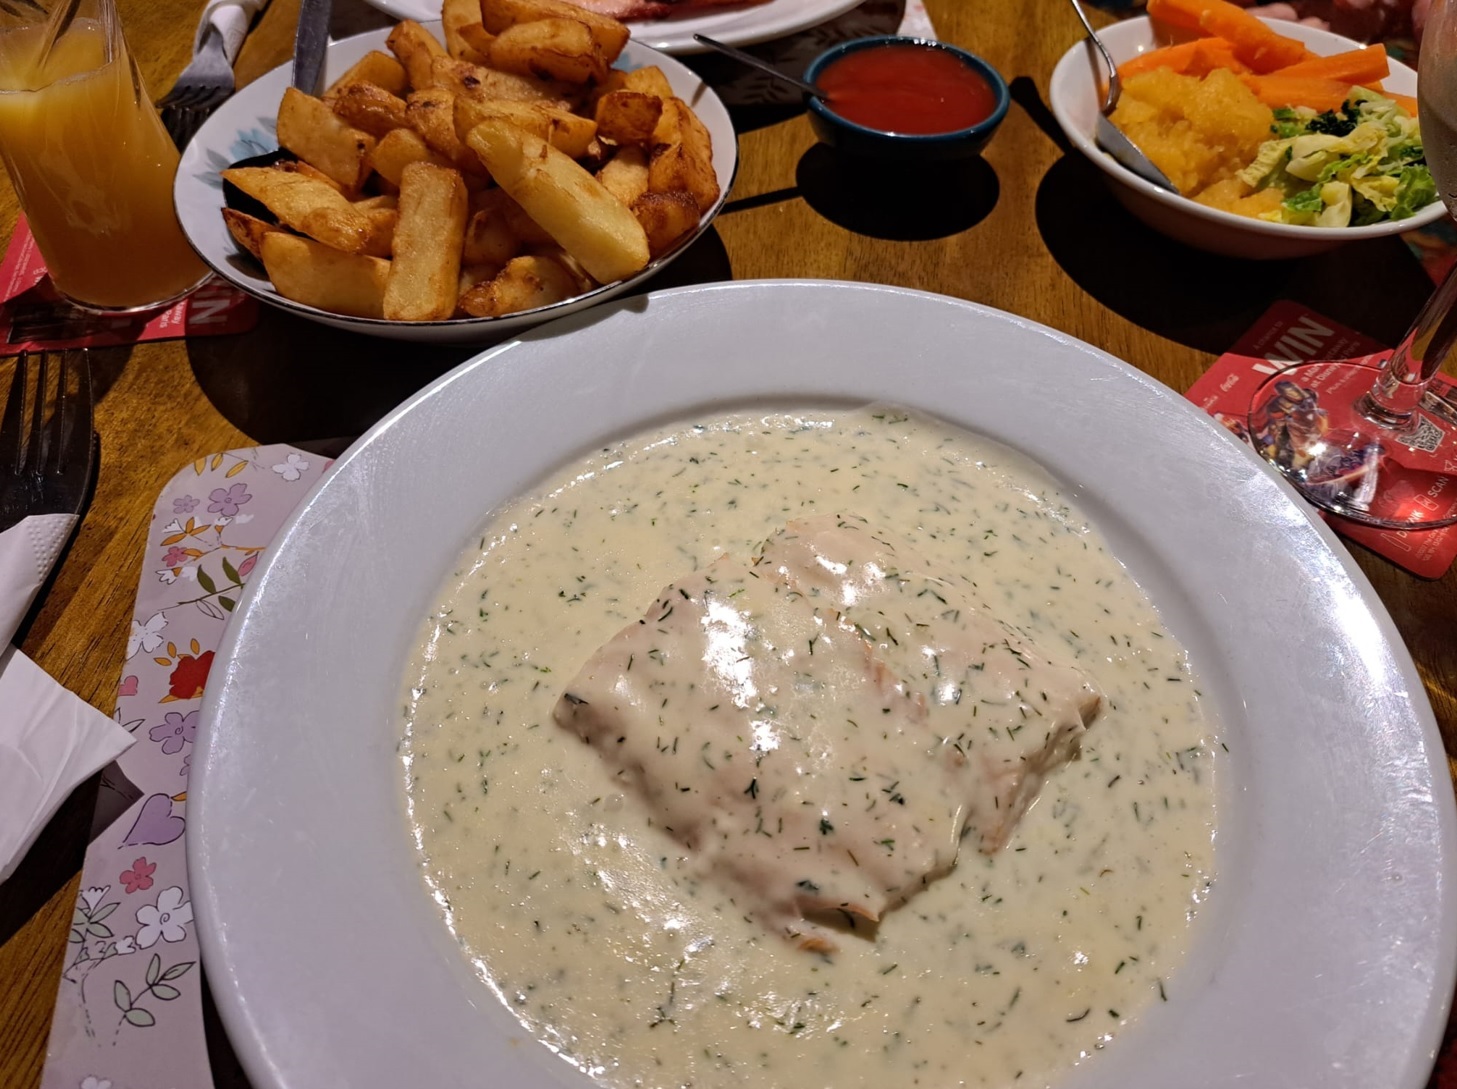 Salmon in a dill sauce, from the specials menu